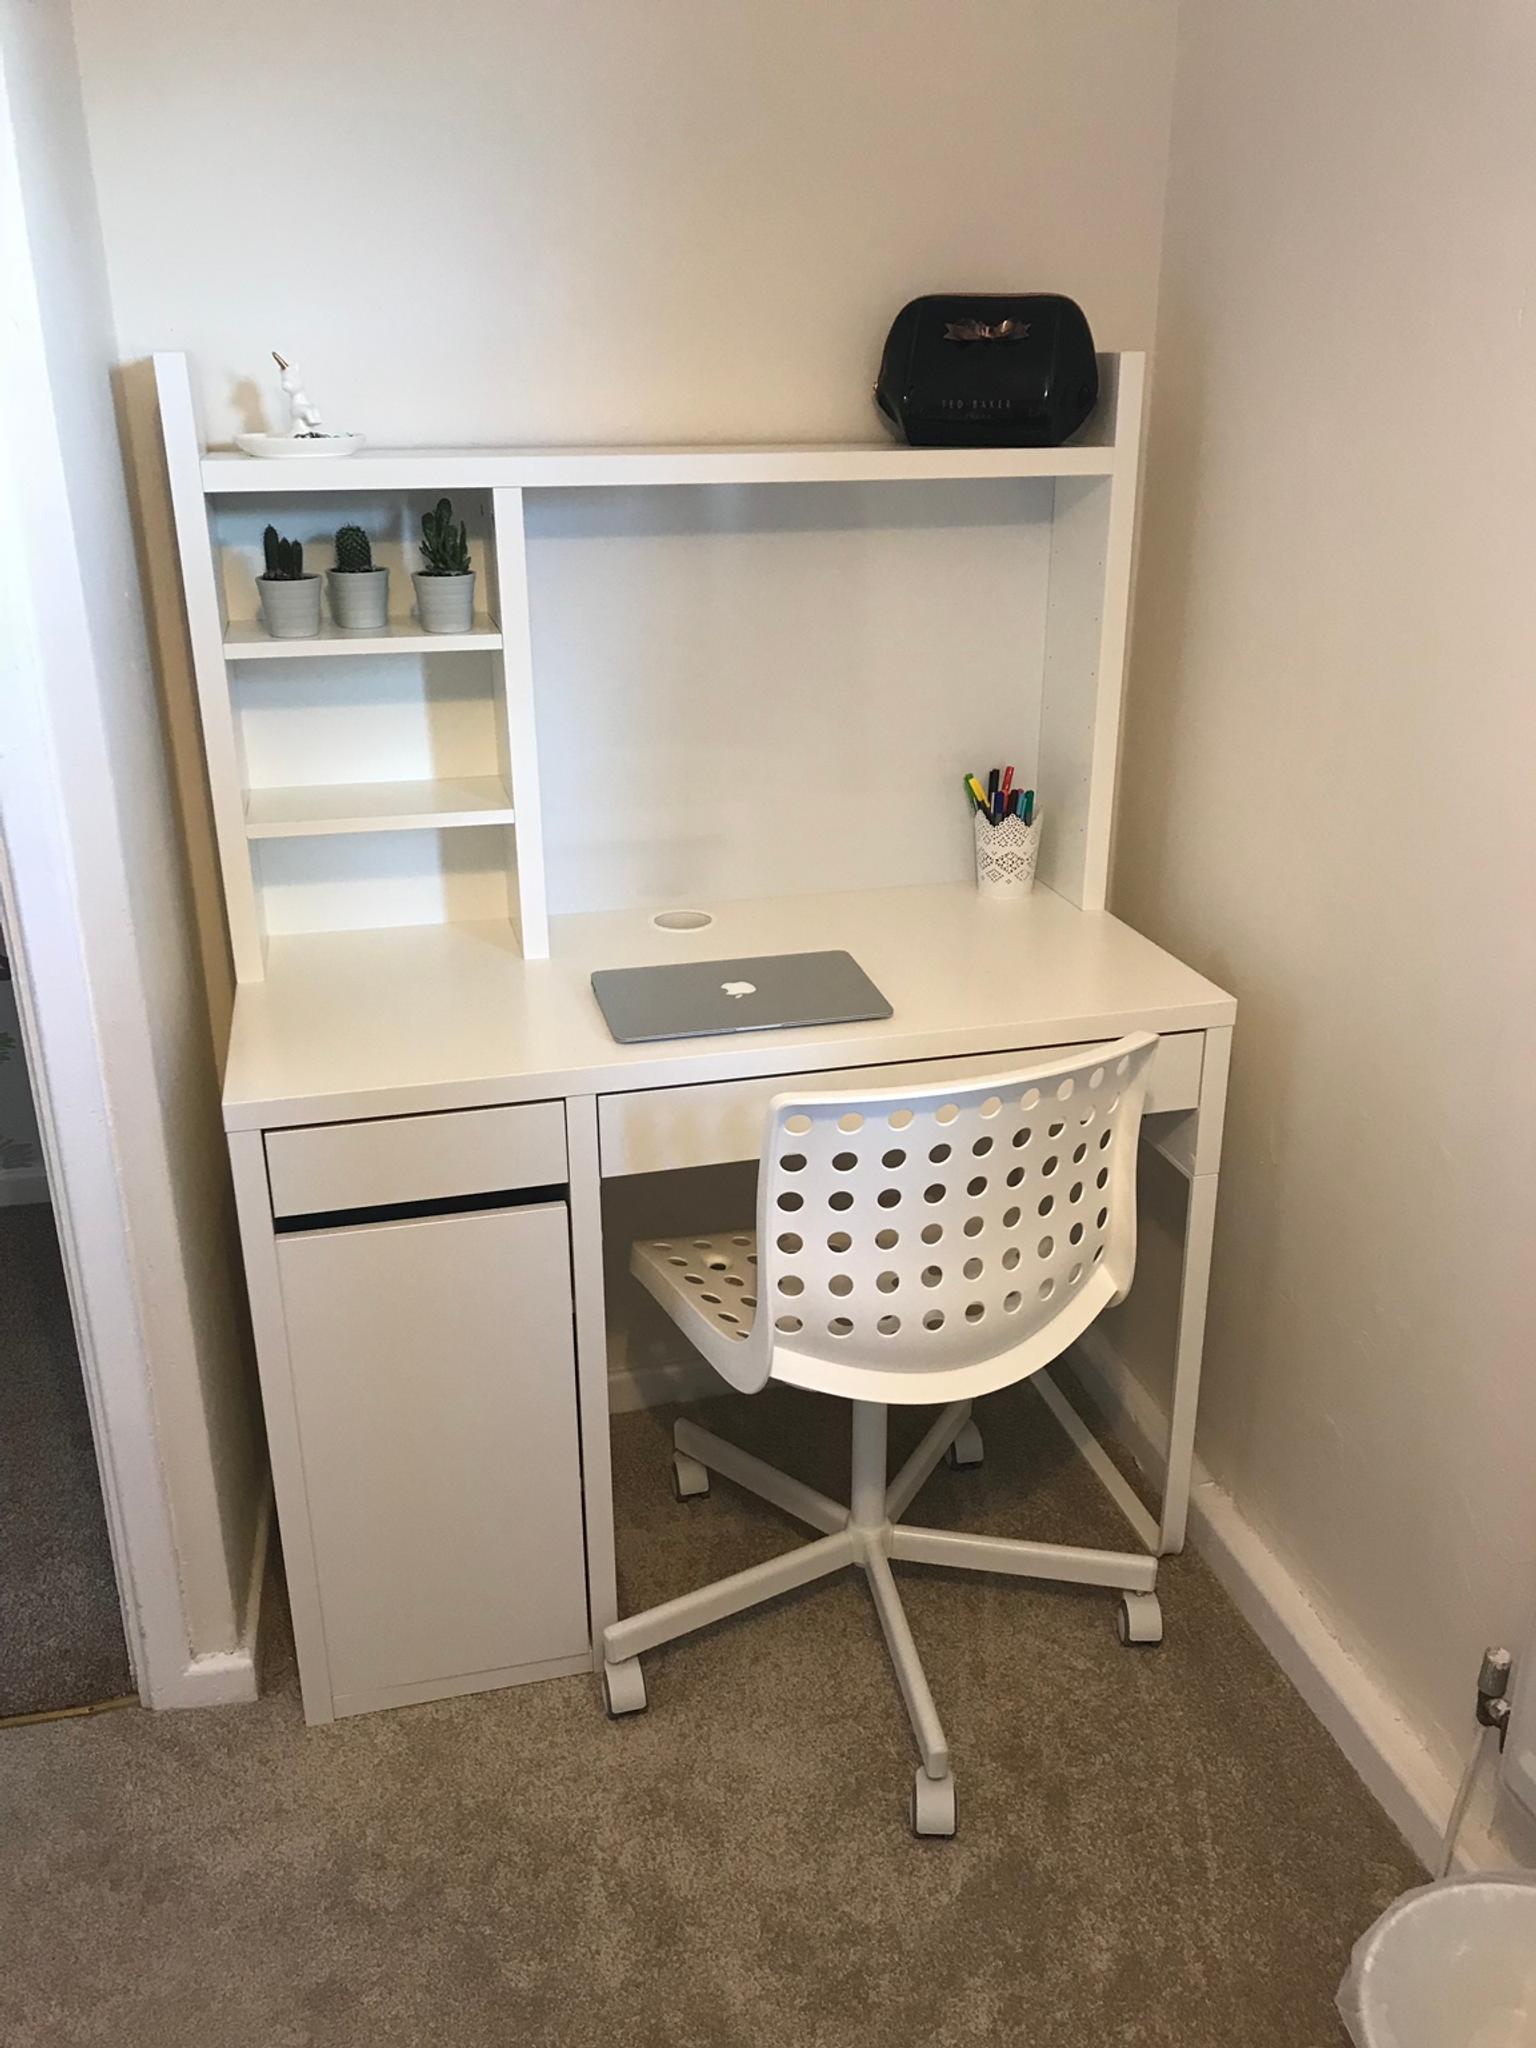 Ikea Micke desk and shelves in Middlesbrough for £60.00 ...